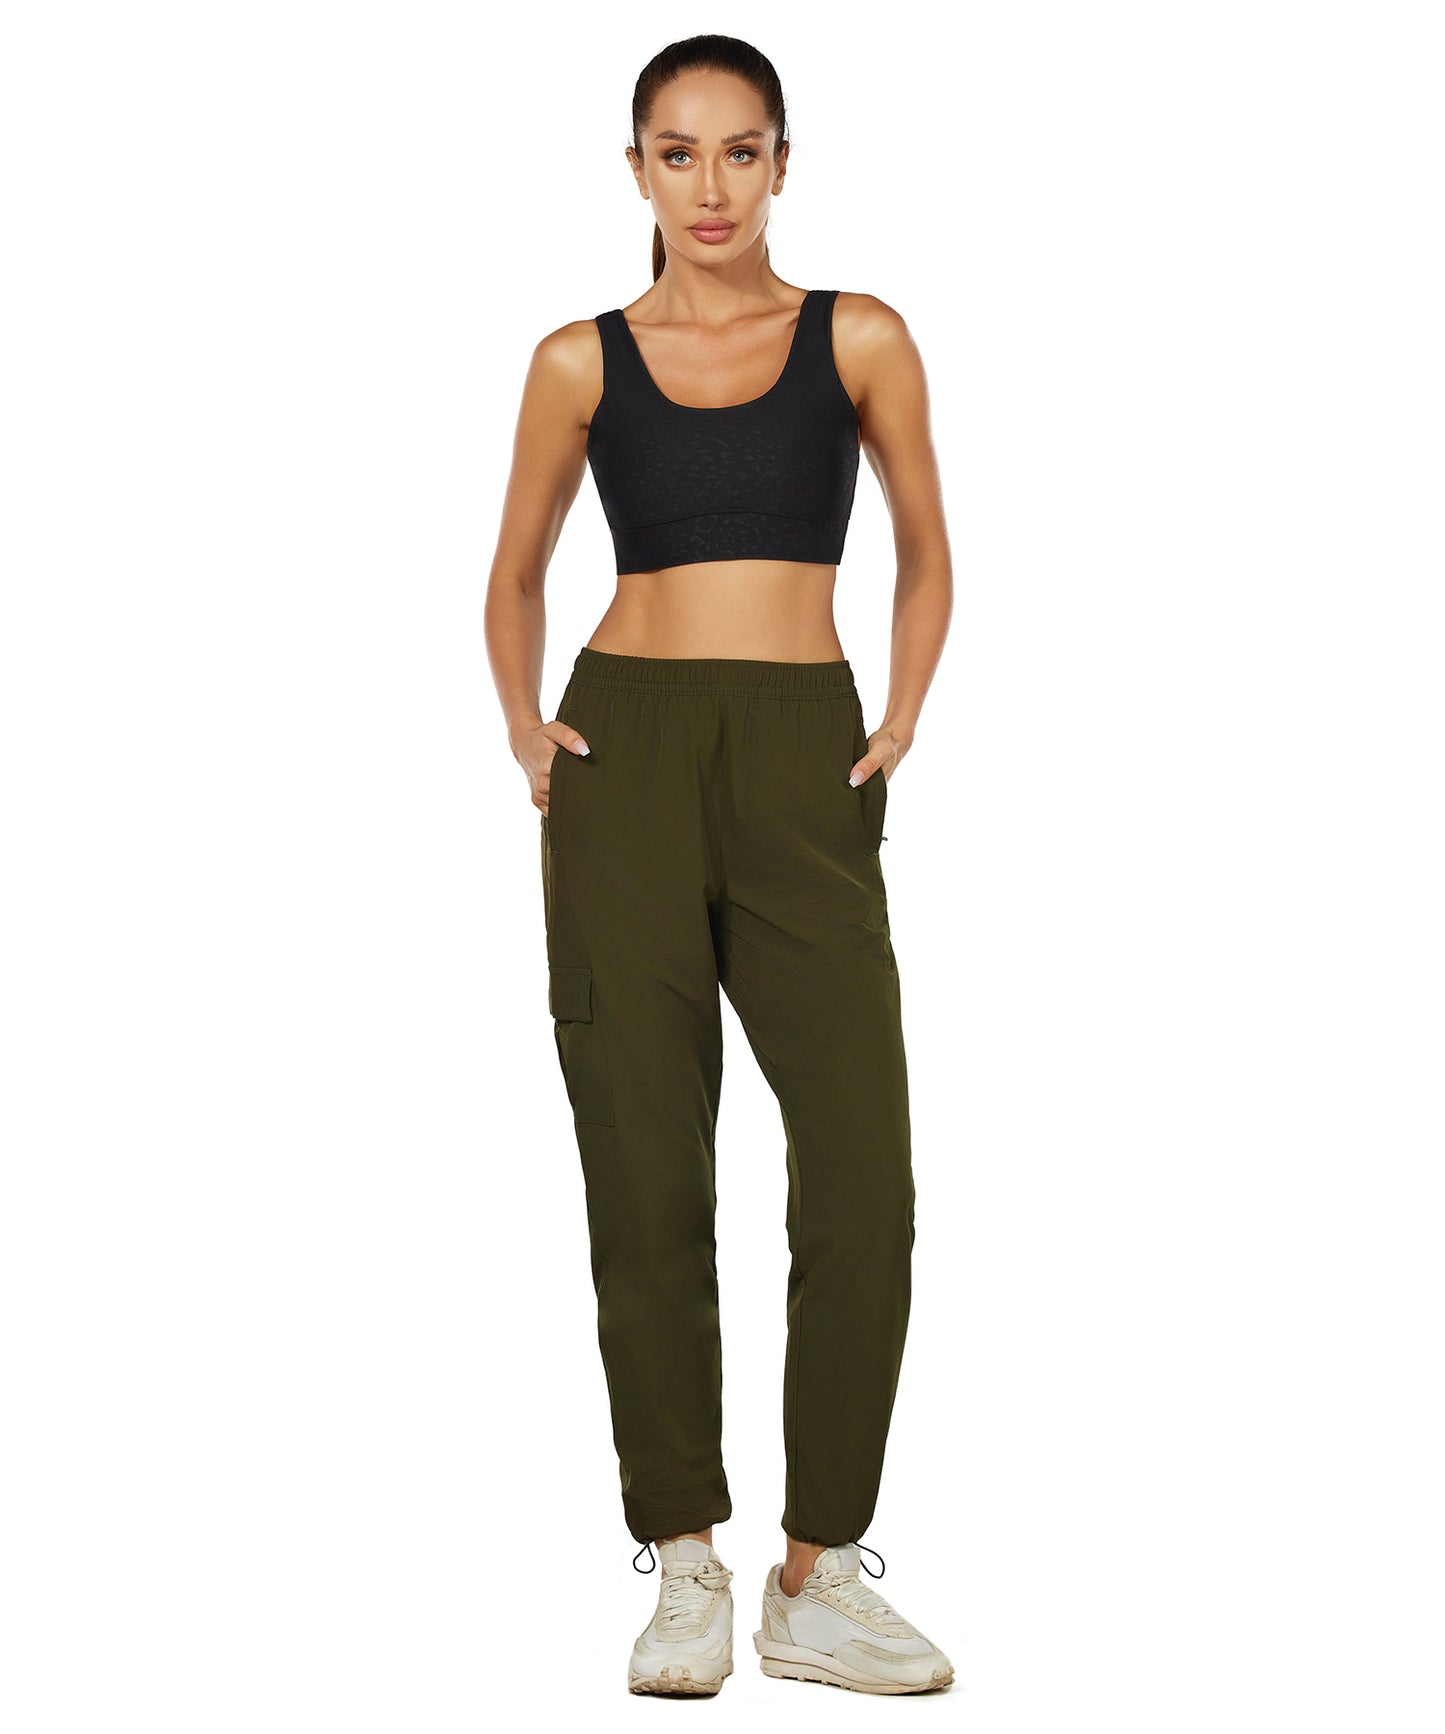 One for All High-Waisted Hiking Pants Army